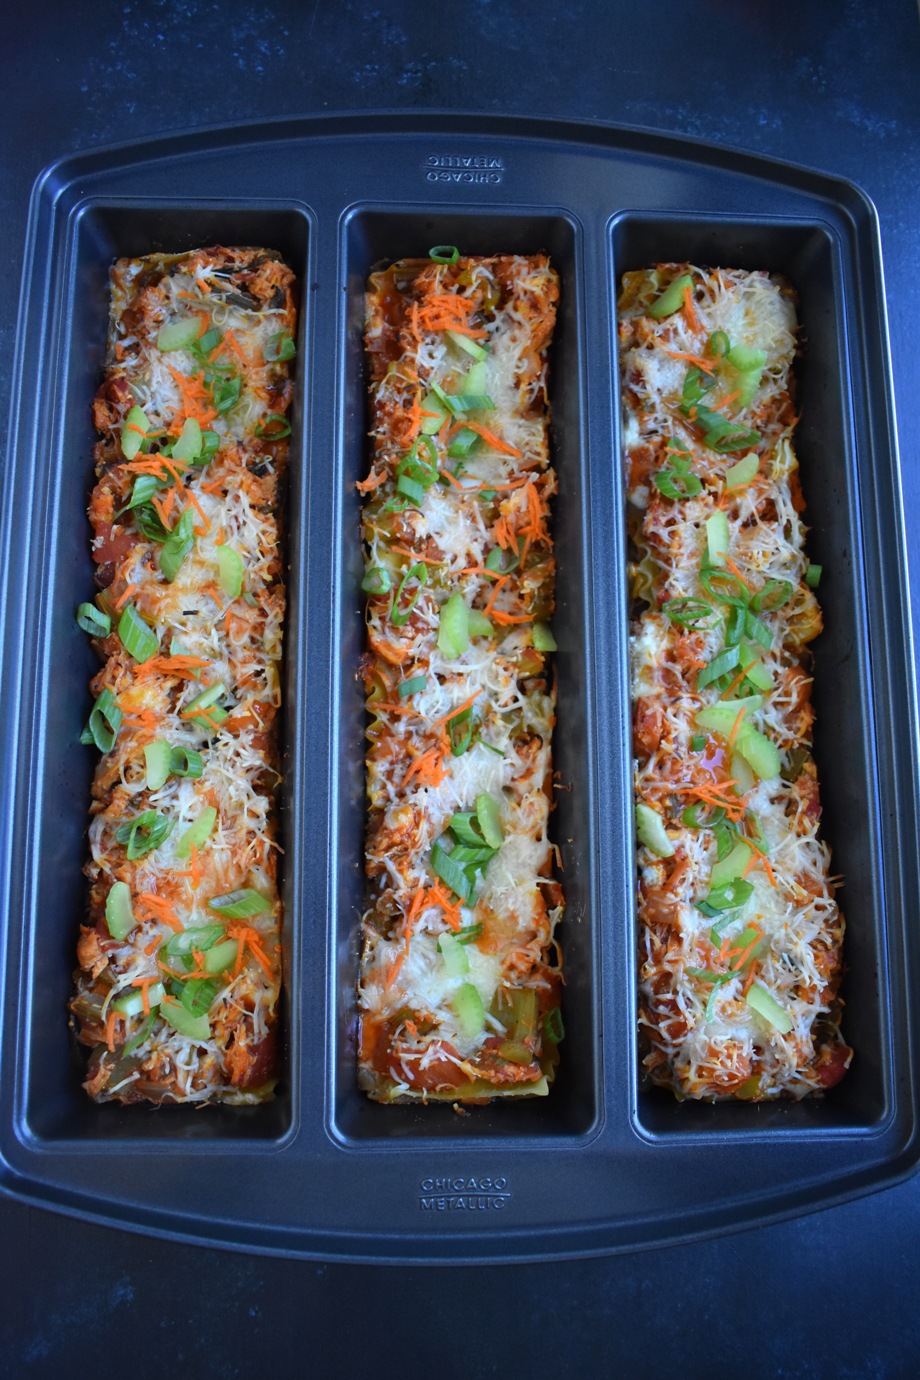 Buffalo Chicken Lasagna is loaded with spicy buffalo flavor, shredded chicken, celery, carrots, onions and is covered in melted cheese. It is rich and creamy making it the perfect filling dinner! www.nutritionistreviews.com